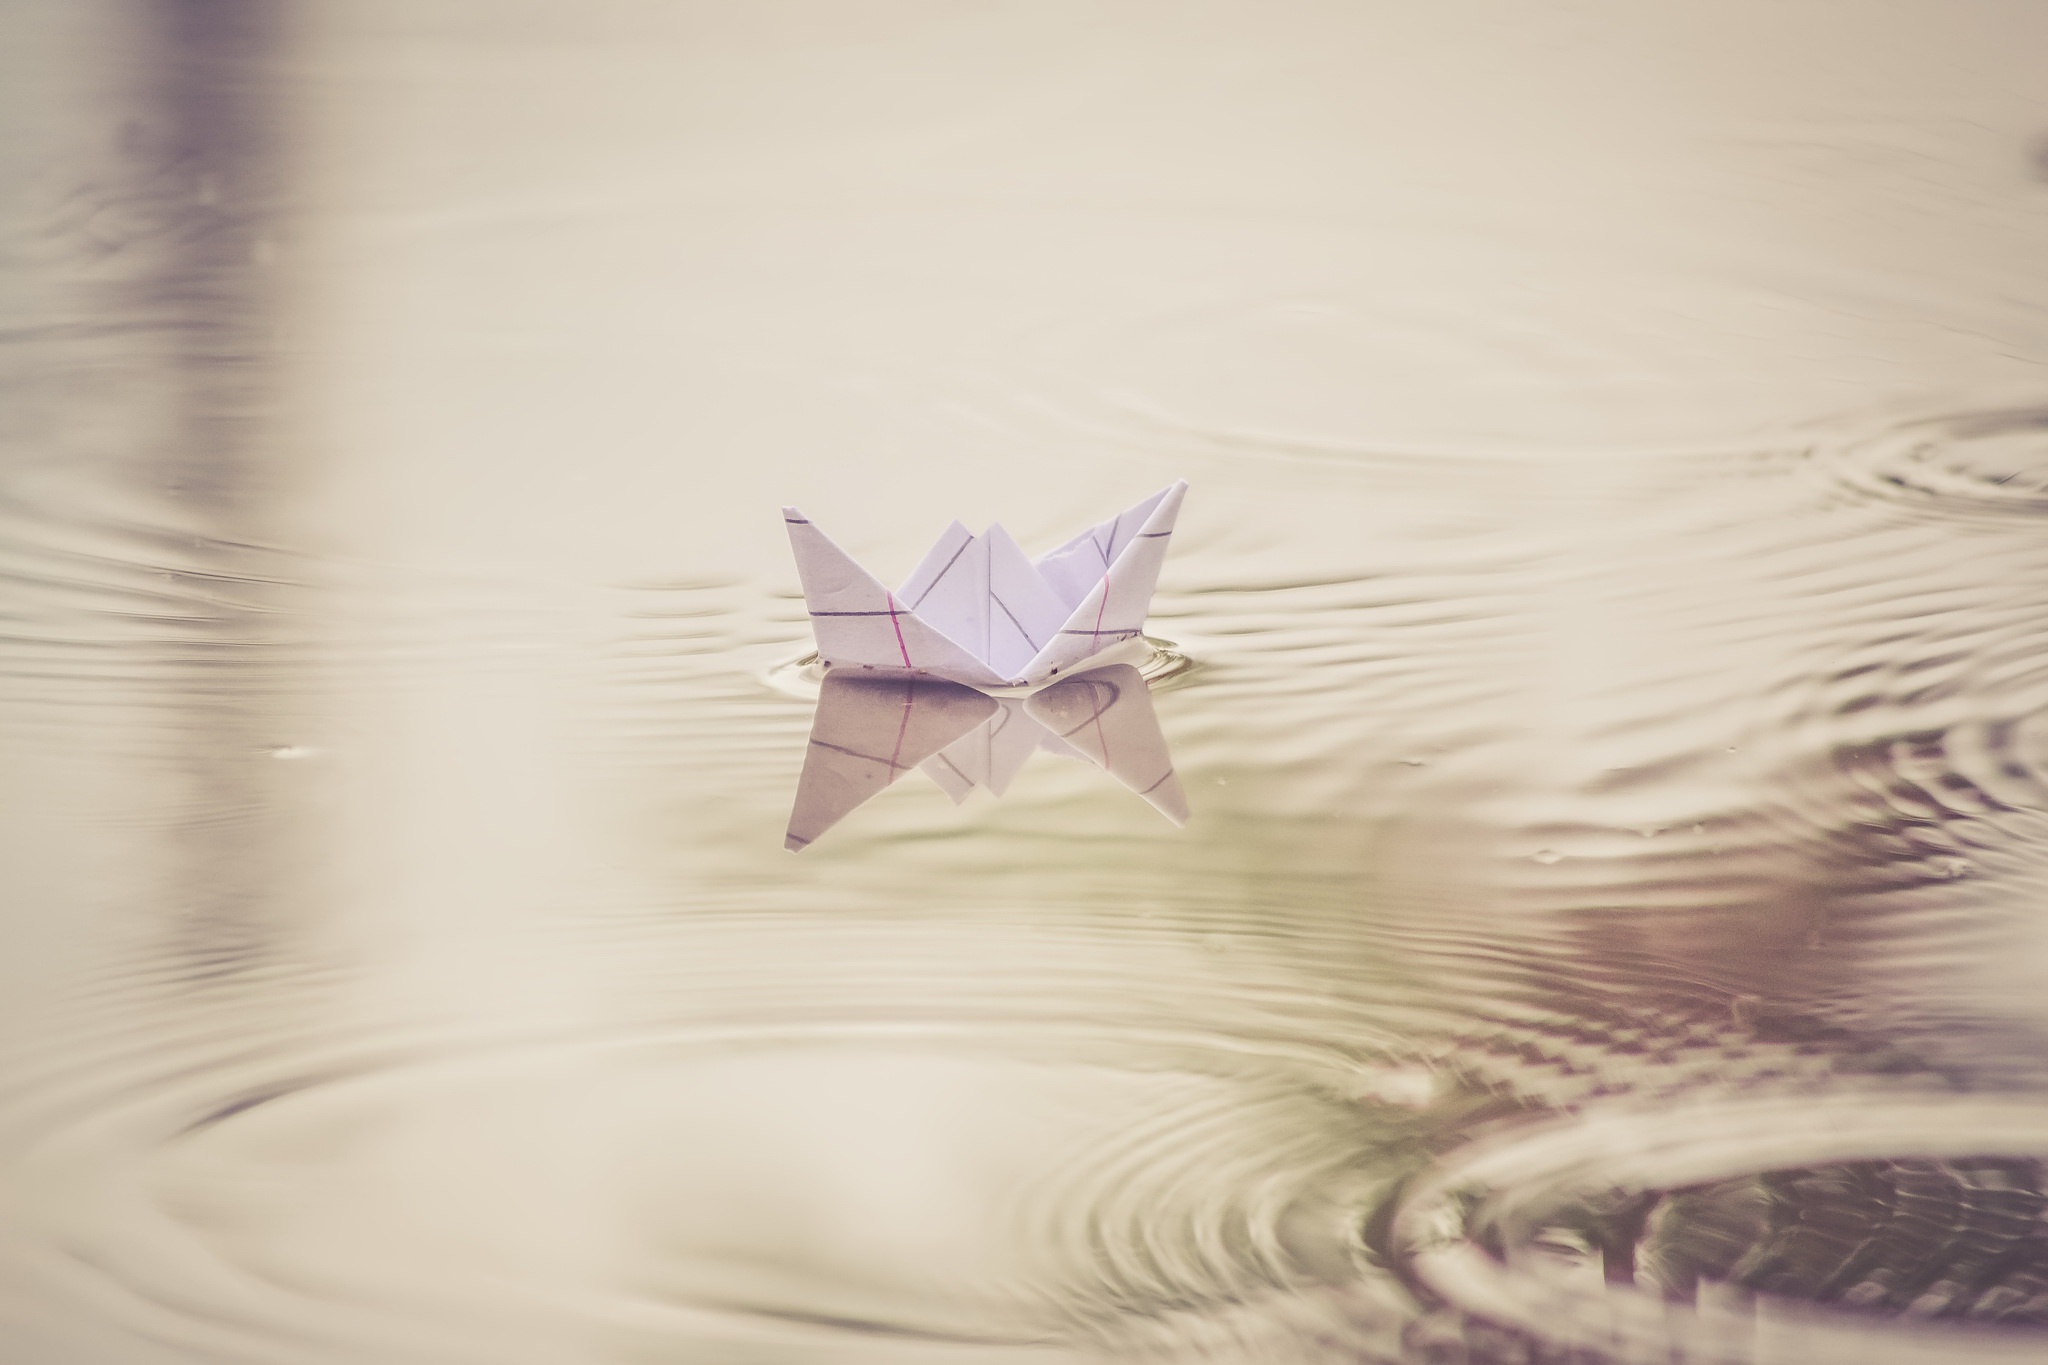 man made, origami, paper boat, water